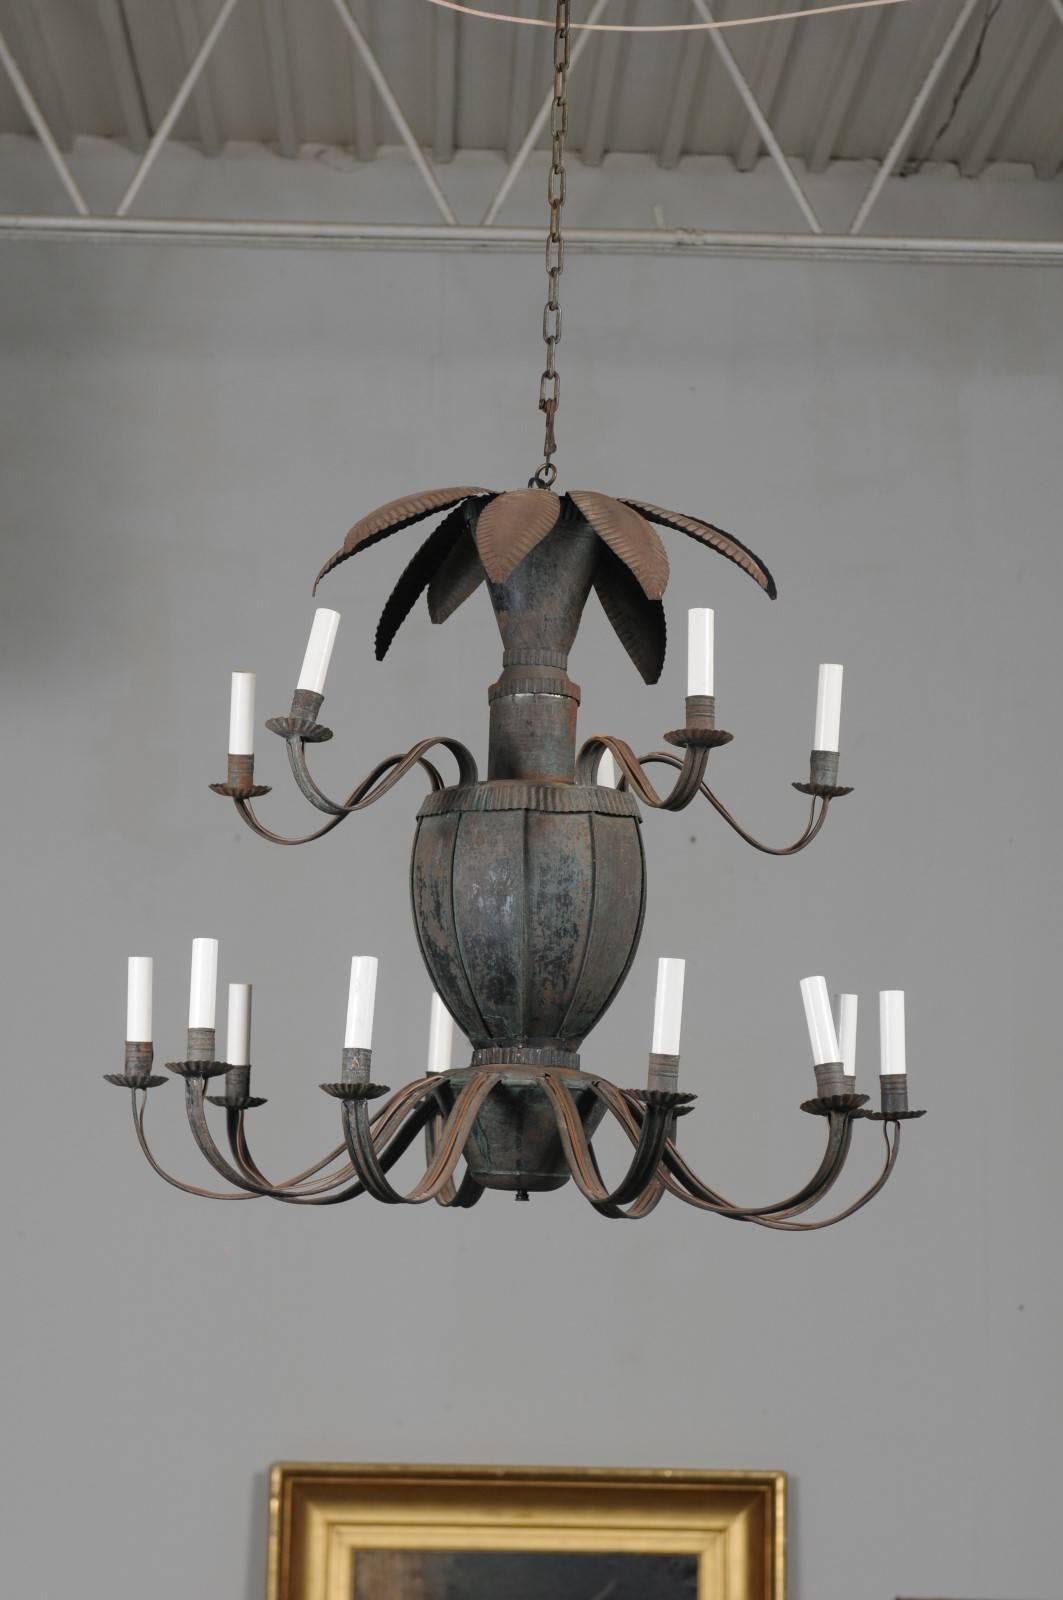 19th Century Unusual French 14-Light Painted Tole Chandelier with Scrolled Arms and Leaves